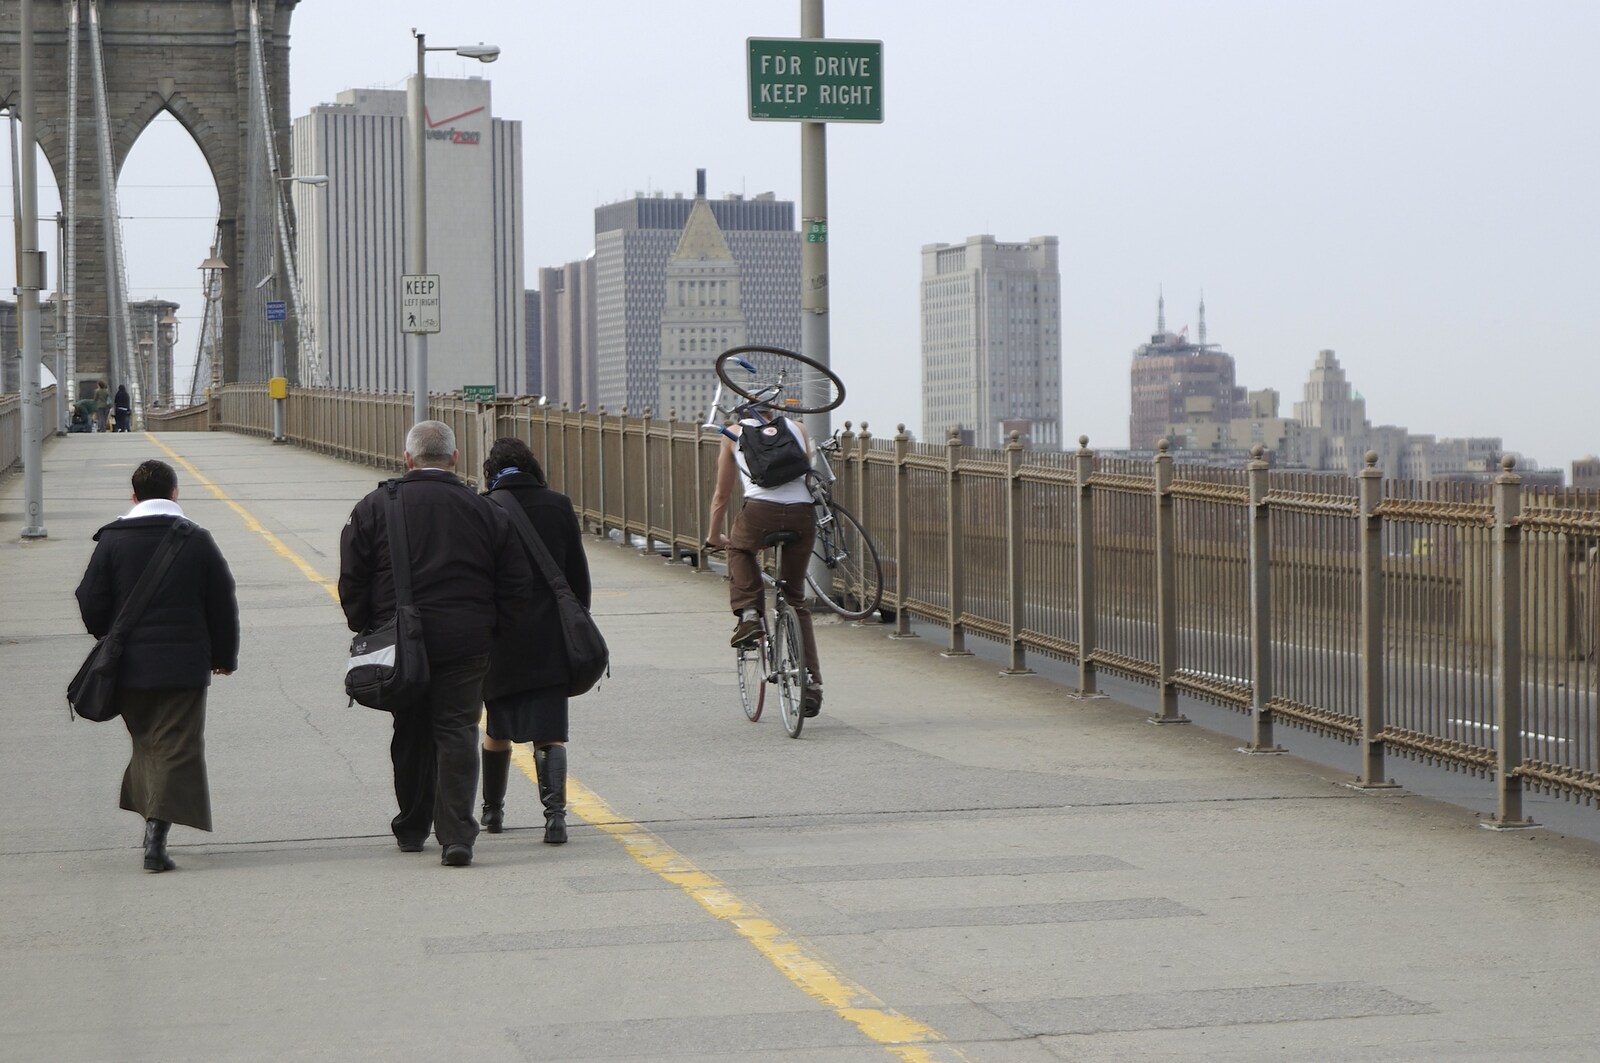 Crossing Brooklyn Bridge, New York, US - 26th March 2007: A cyclist carries a spare bike with him